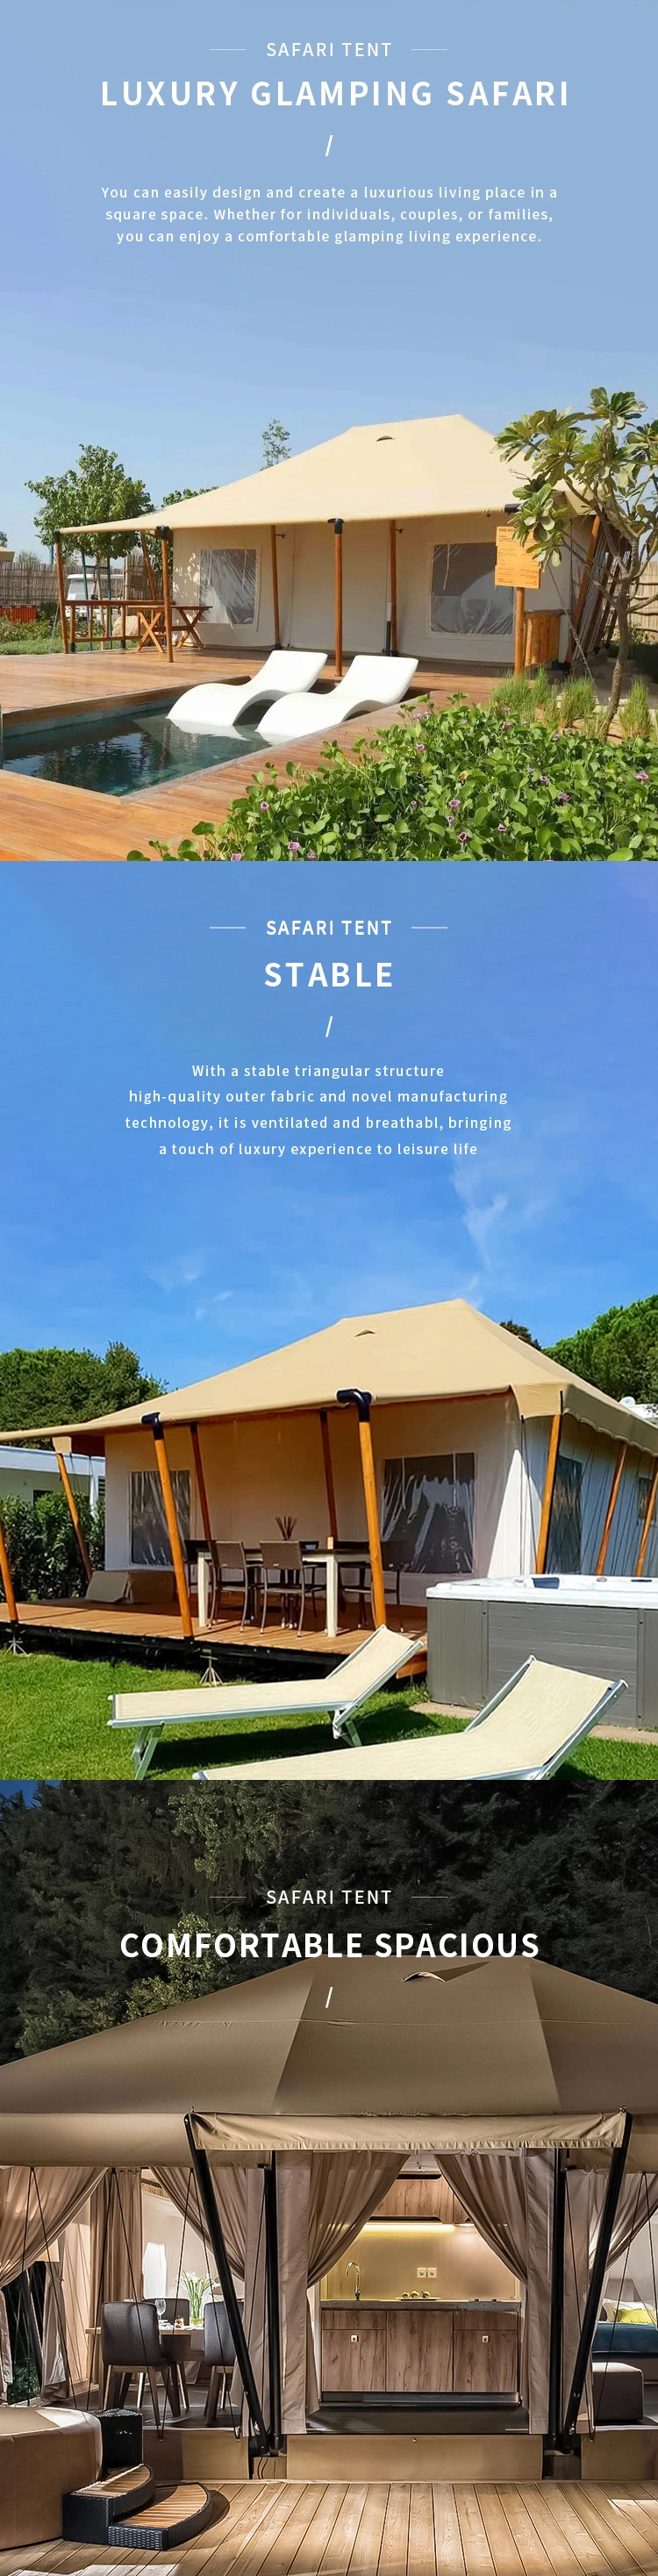 Outdoor Large Glamping Hotel Safari Tent Supplier for Beach Glamping Tent Hotel